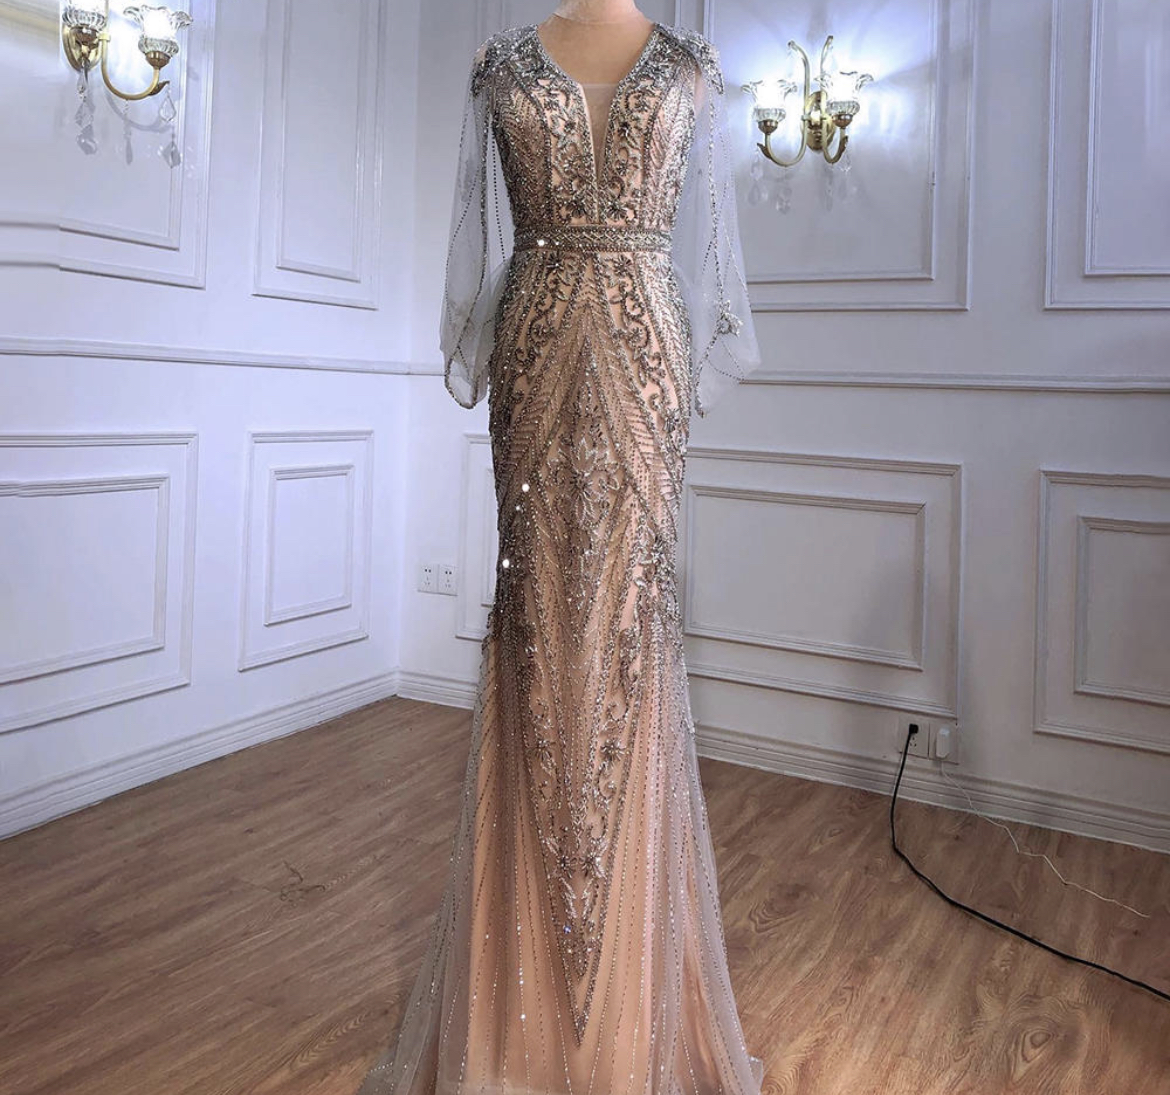 Nude Cape Style Beaded Evening Gown - Evening Dresses, Made To Order ...